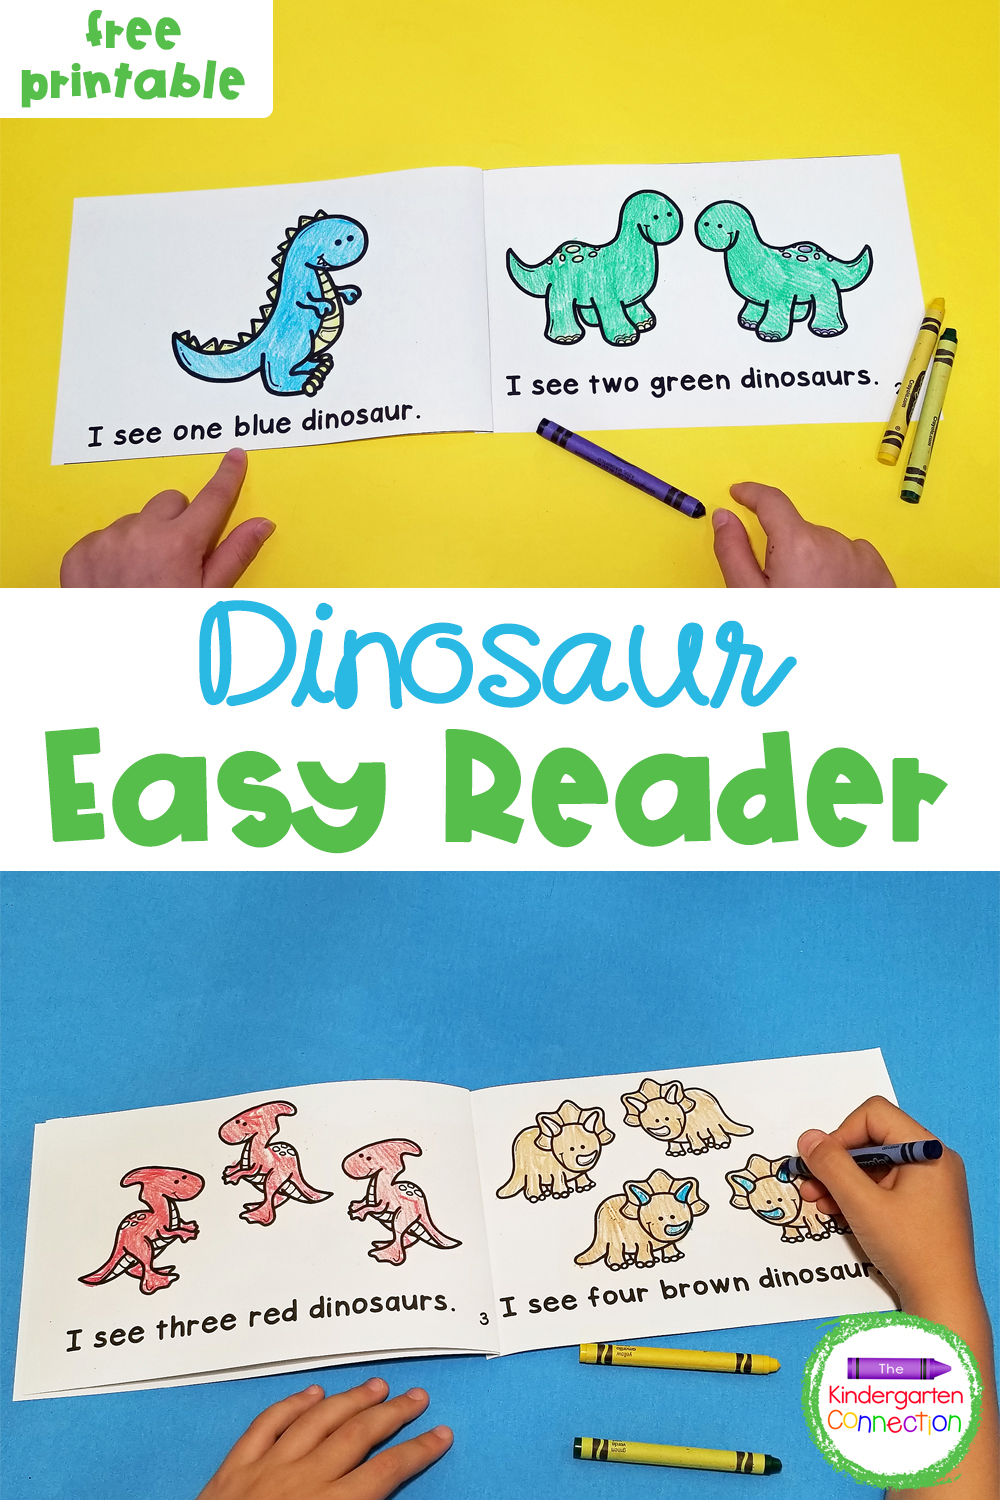 This free Dinosaur Emergent Reader for Pre-K & Kindergarten is a fun companion to your favorite dinosaur books and activities!